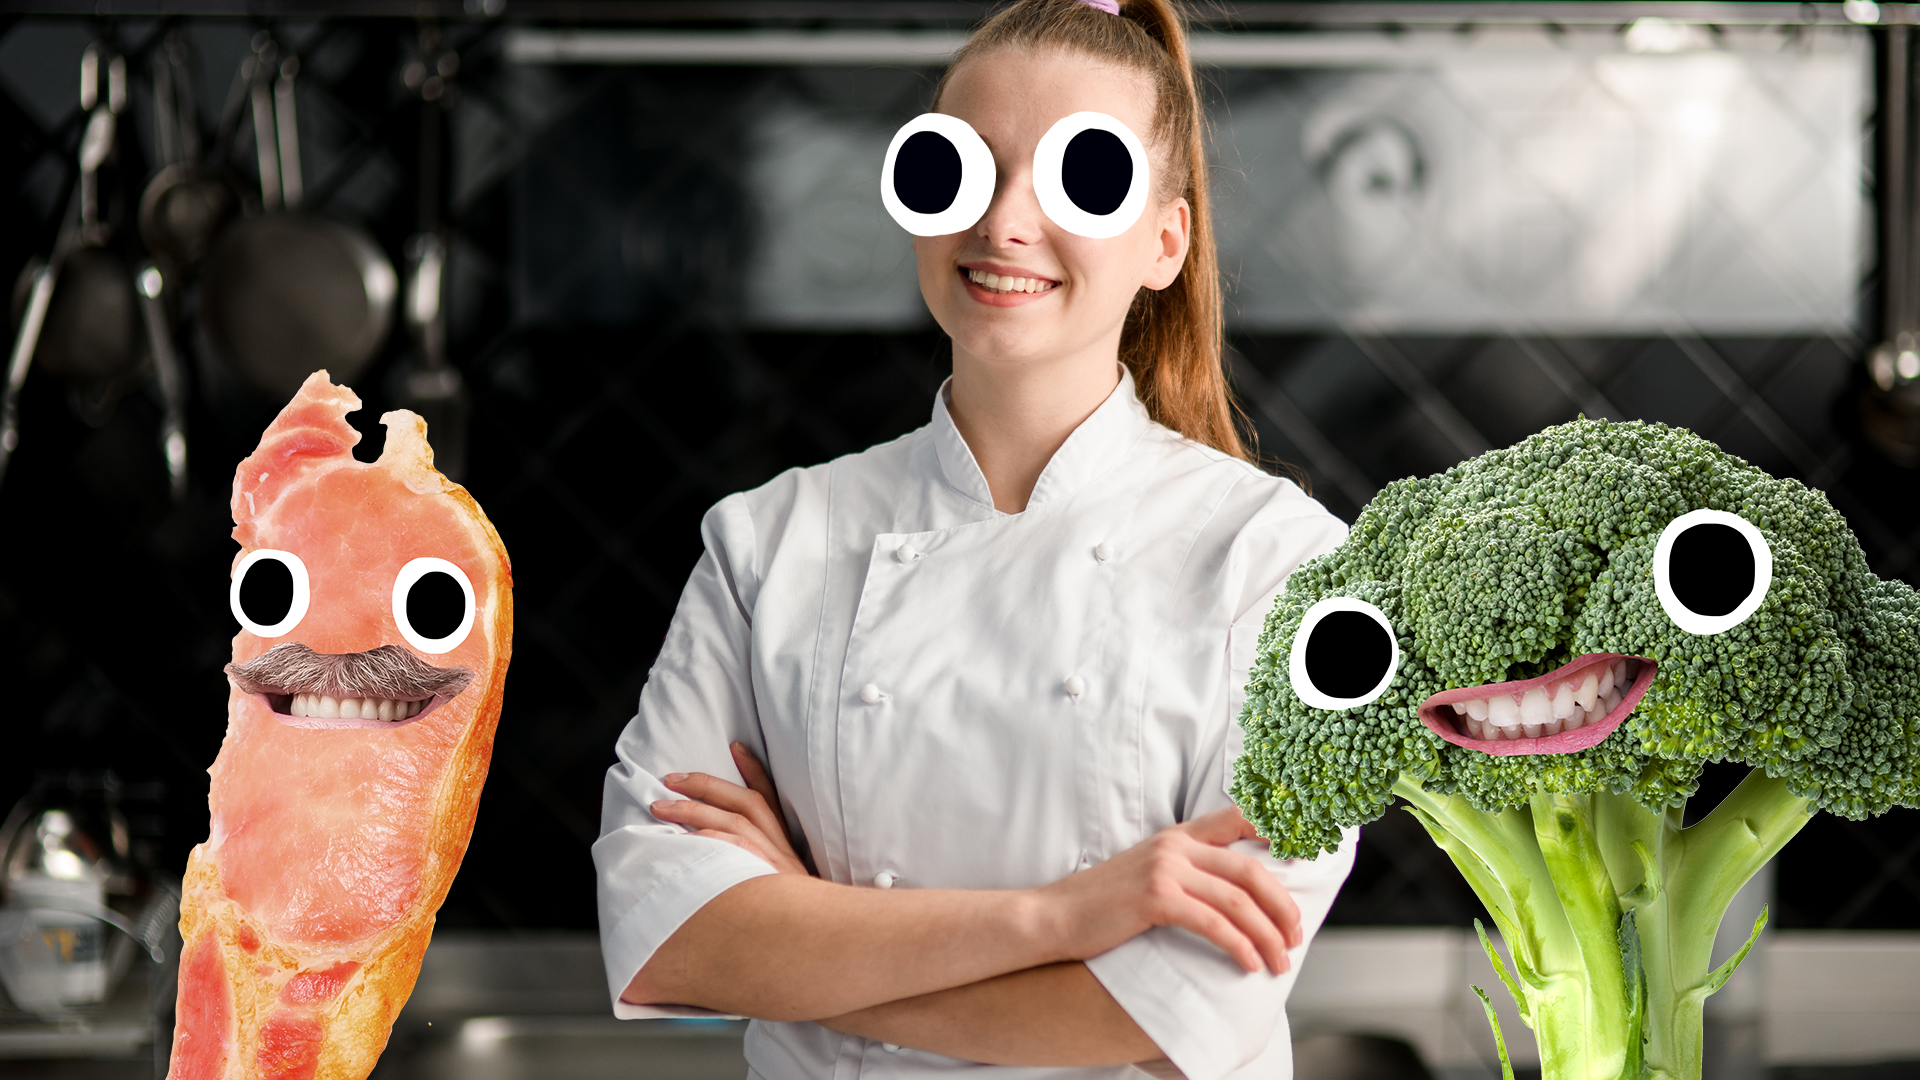 Chef with derpy Beano foods